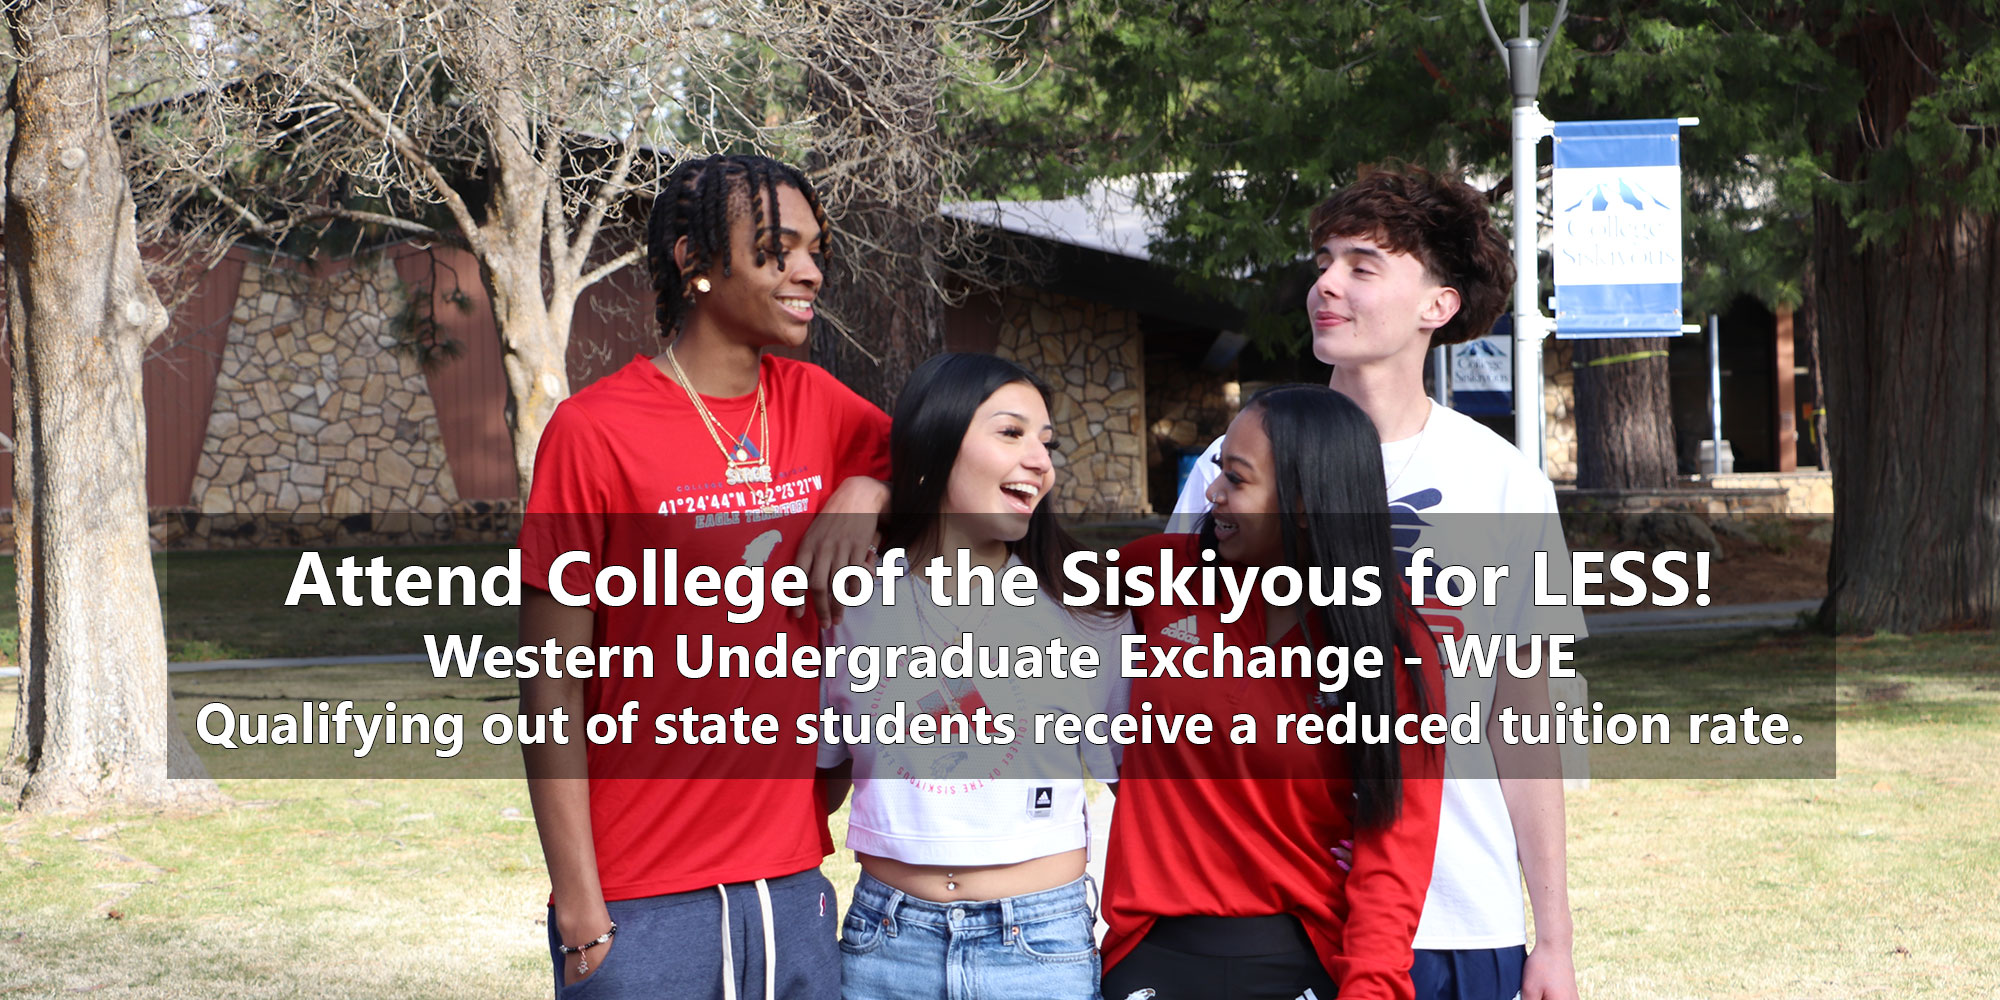 Attend College of the Siskiyous for Less! Western Undergraduate Exchange - WUE. Qualifying out of state students receive a reduced tuition rate.